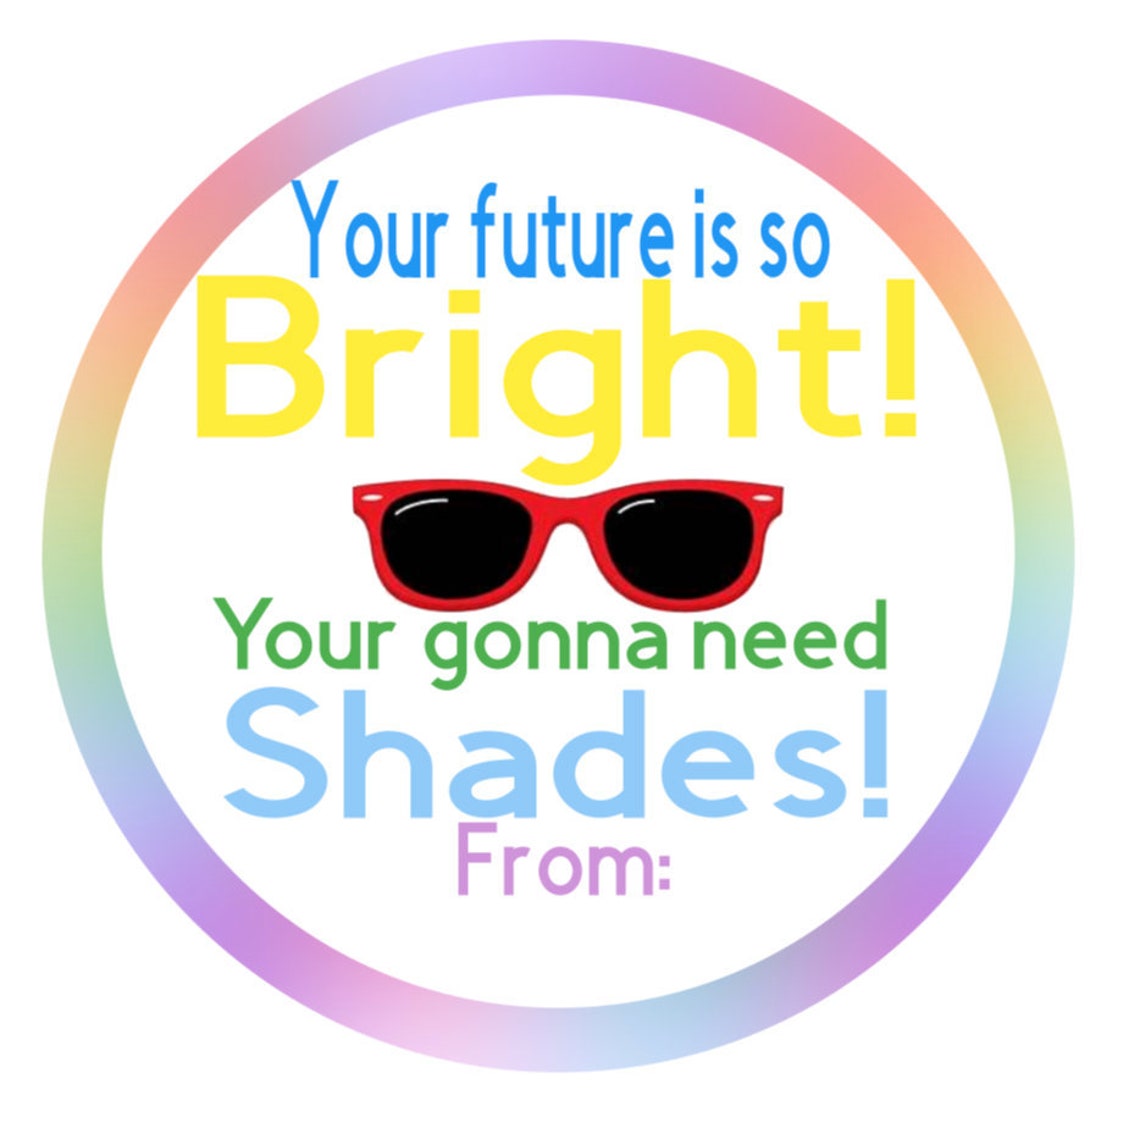 printable-sunglasses-gift-tag-your-future-is-so-bright-your-etsy